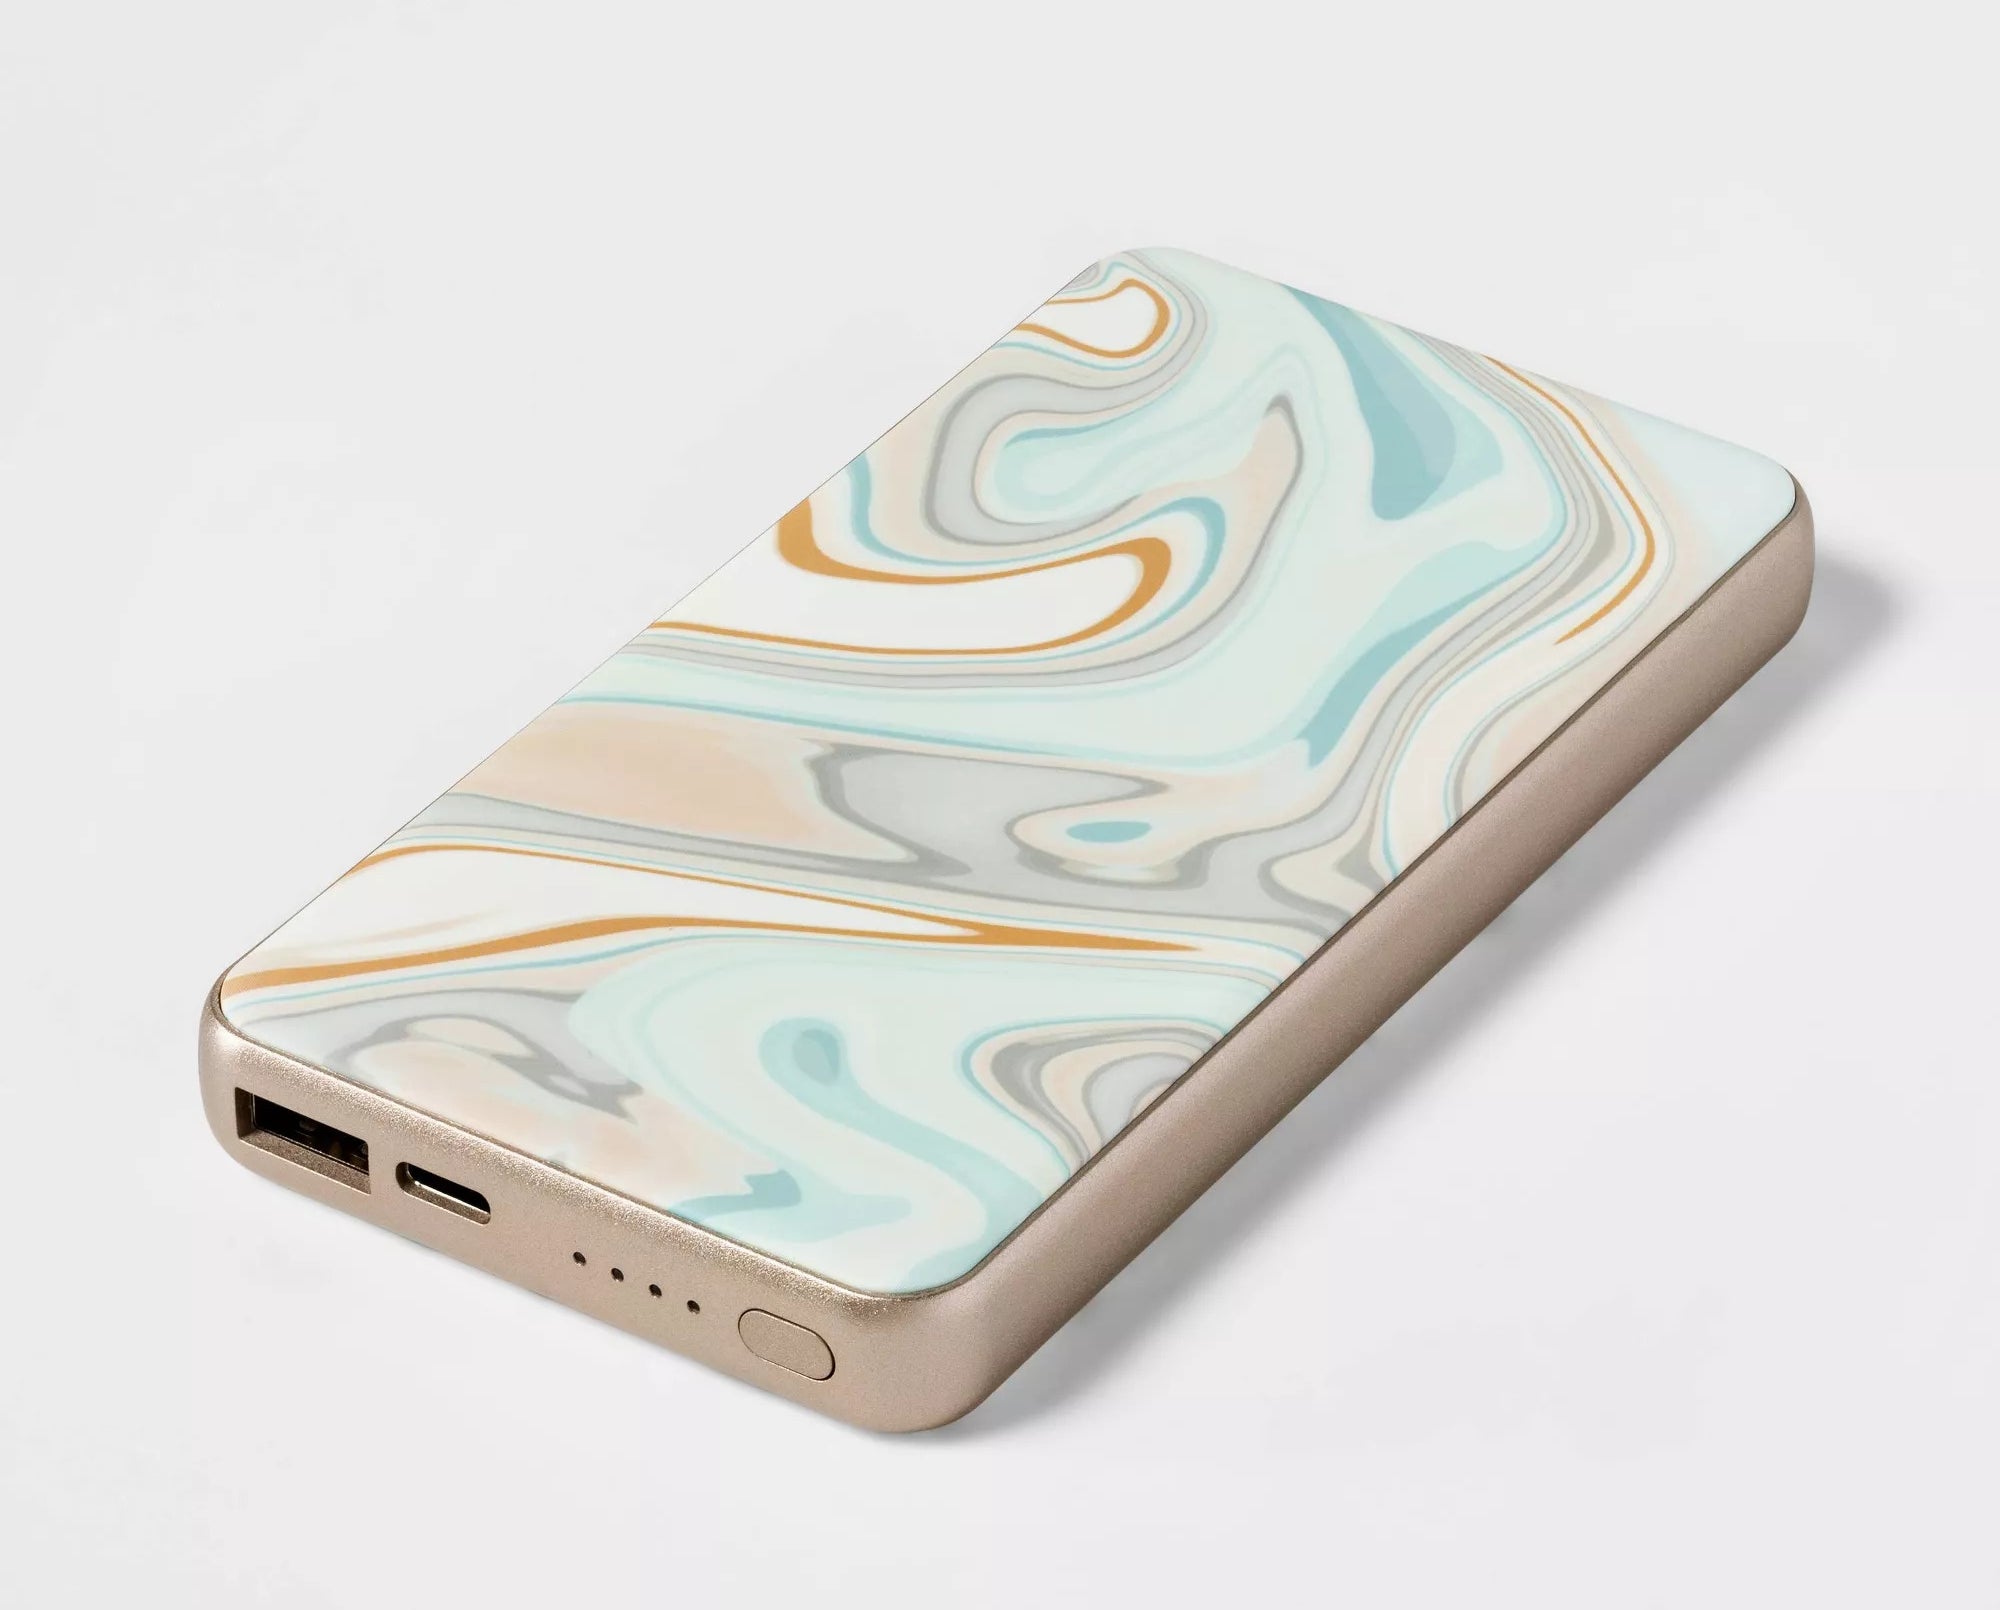 The flat, rectangular charger in a pastel marble design and rose gold accents